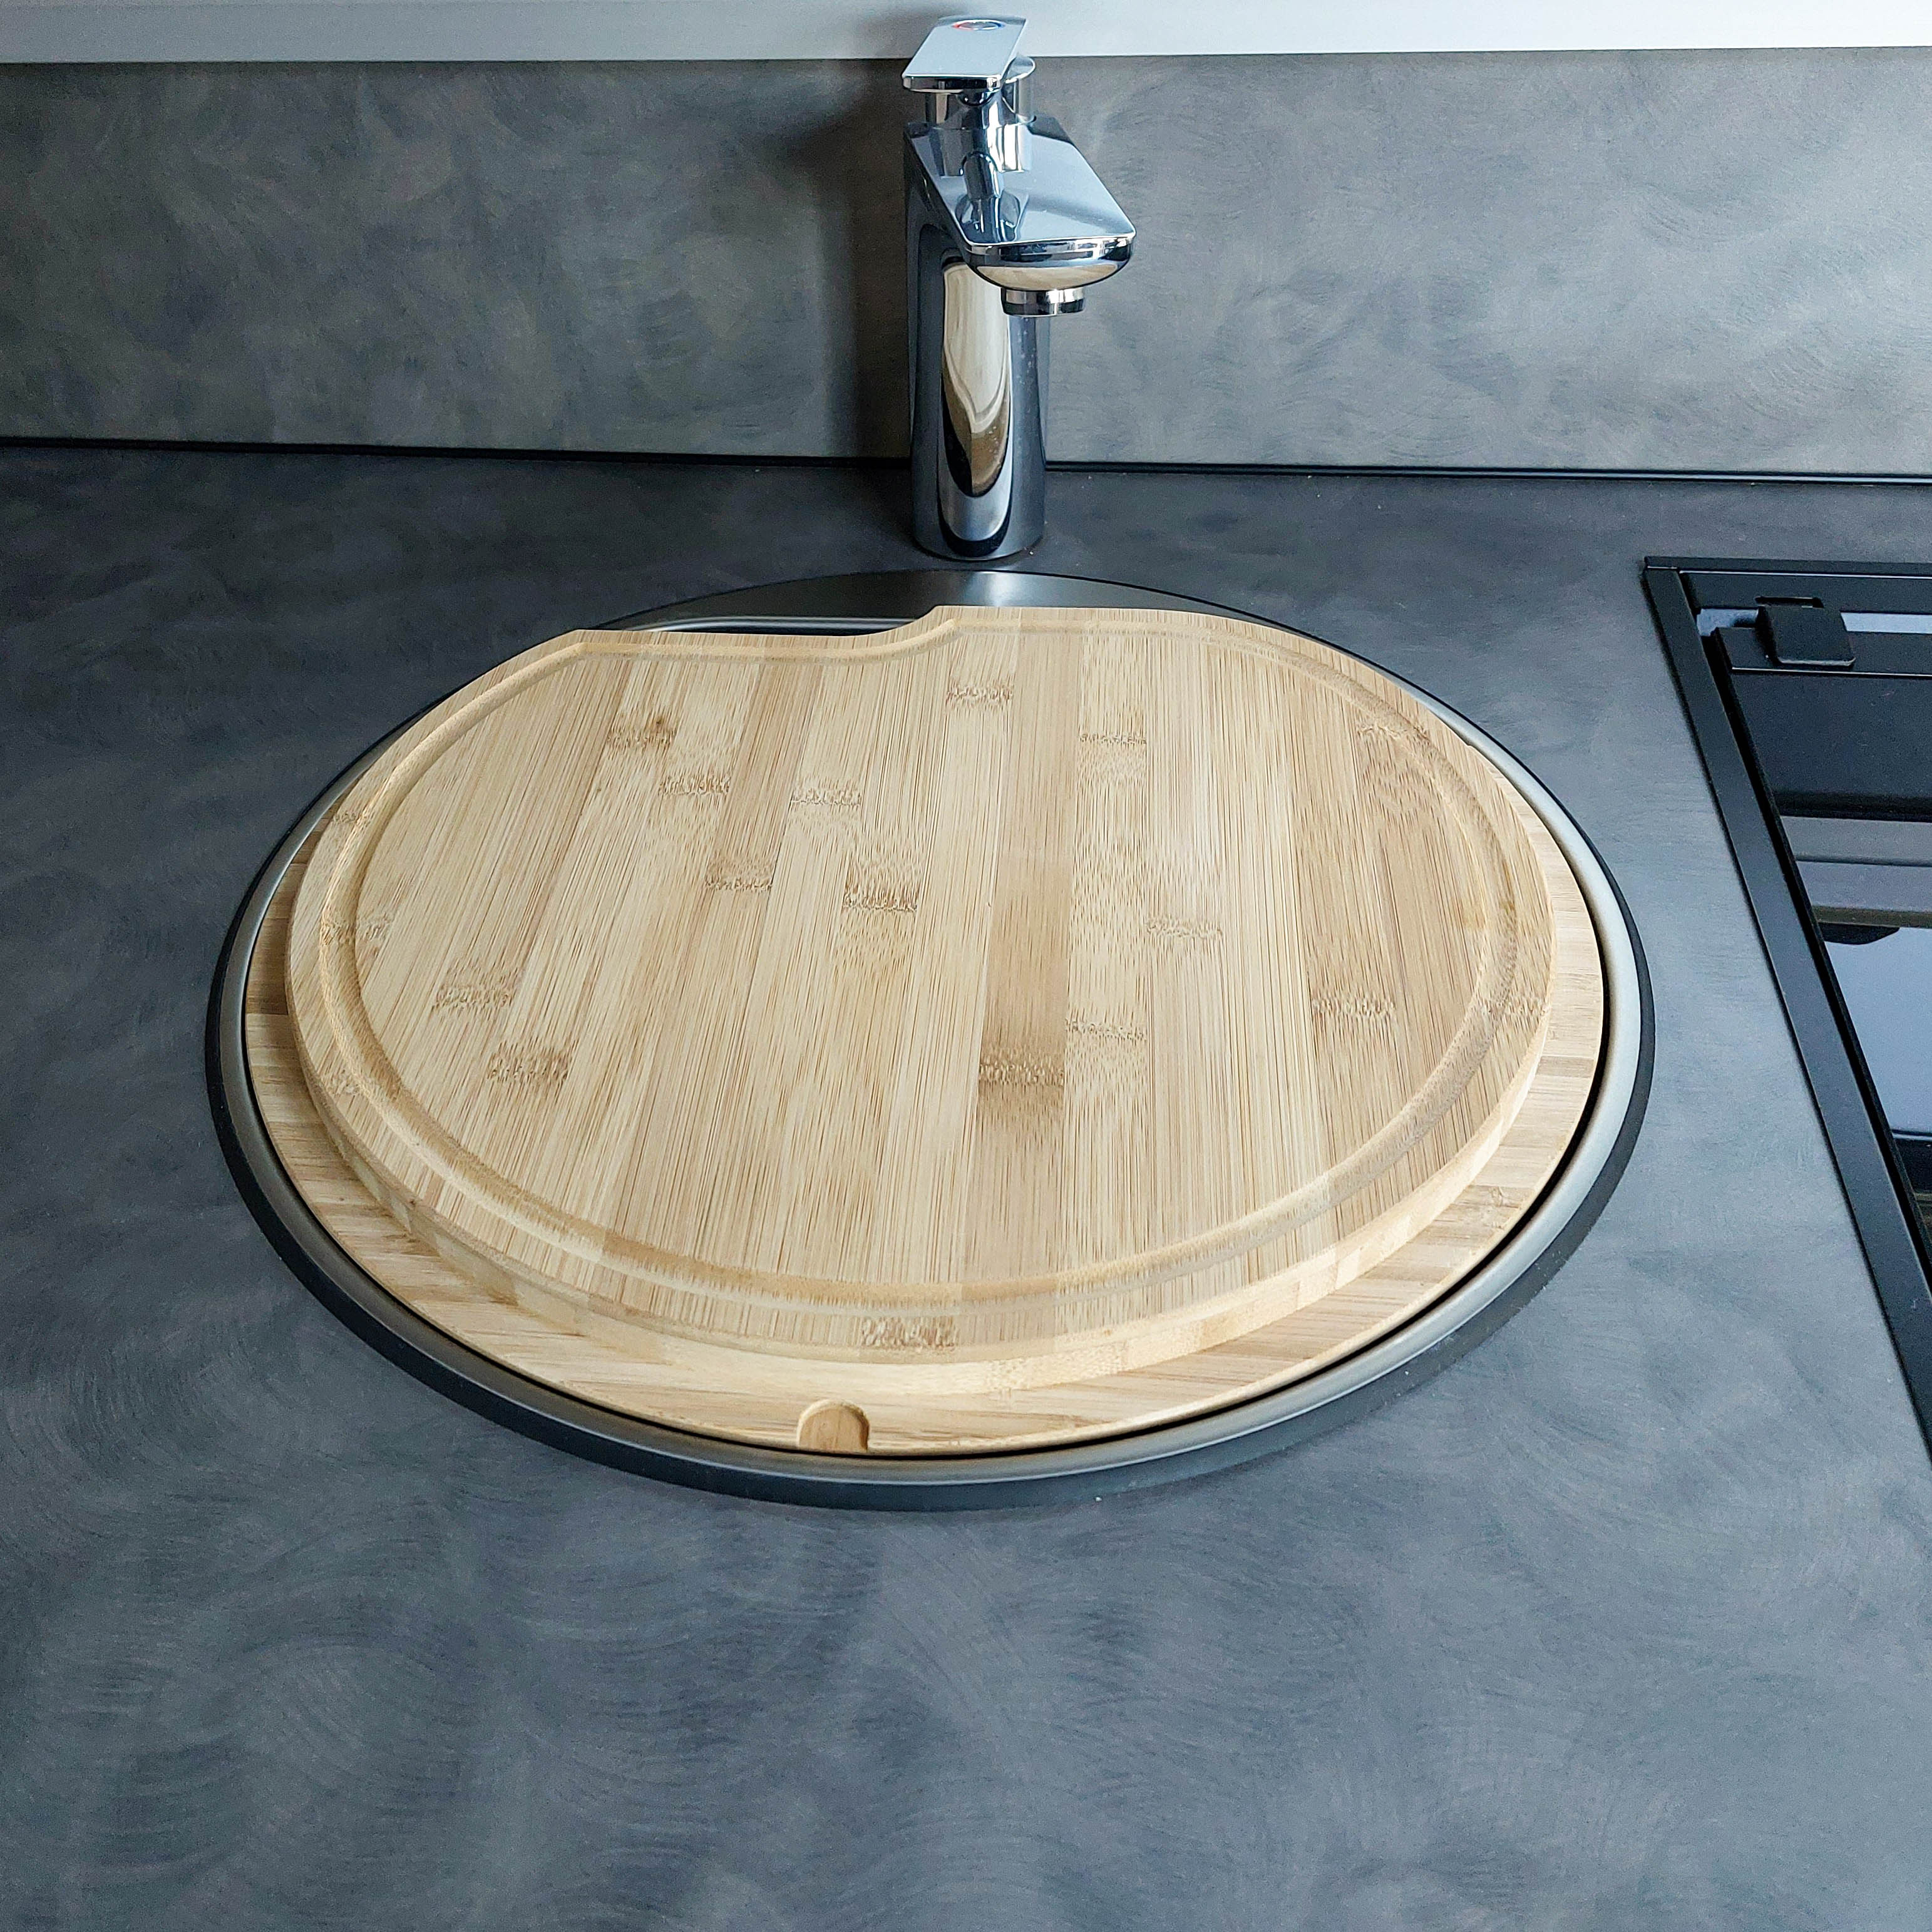 Cutting board with sink cover for Kabe models